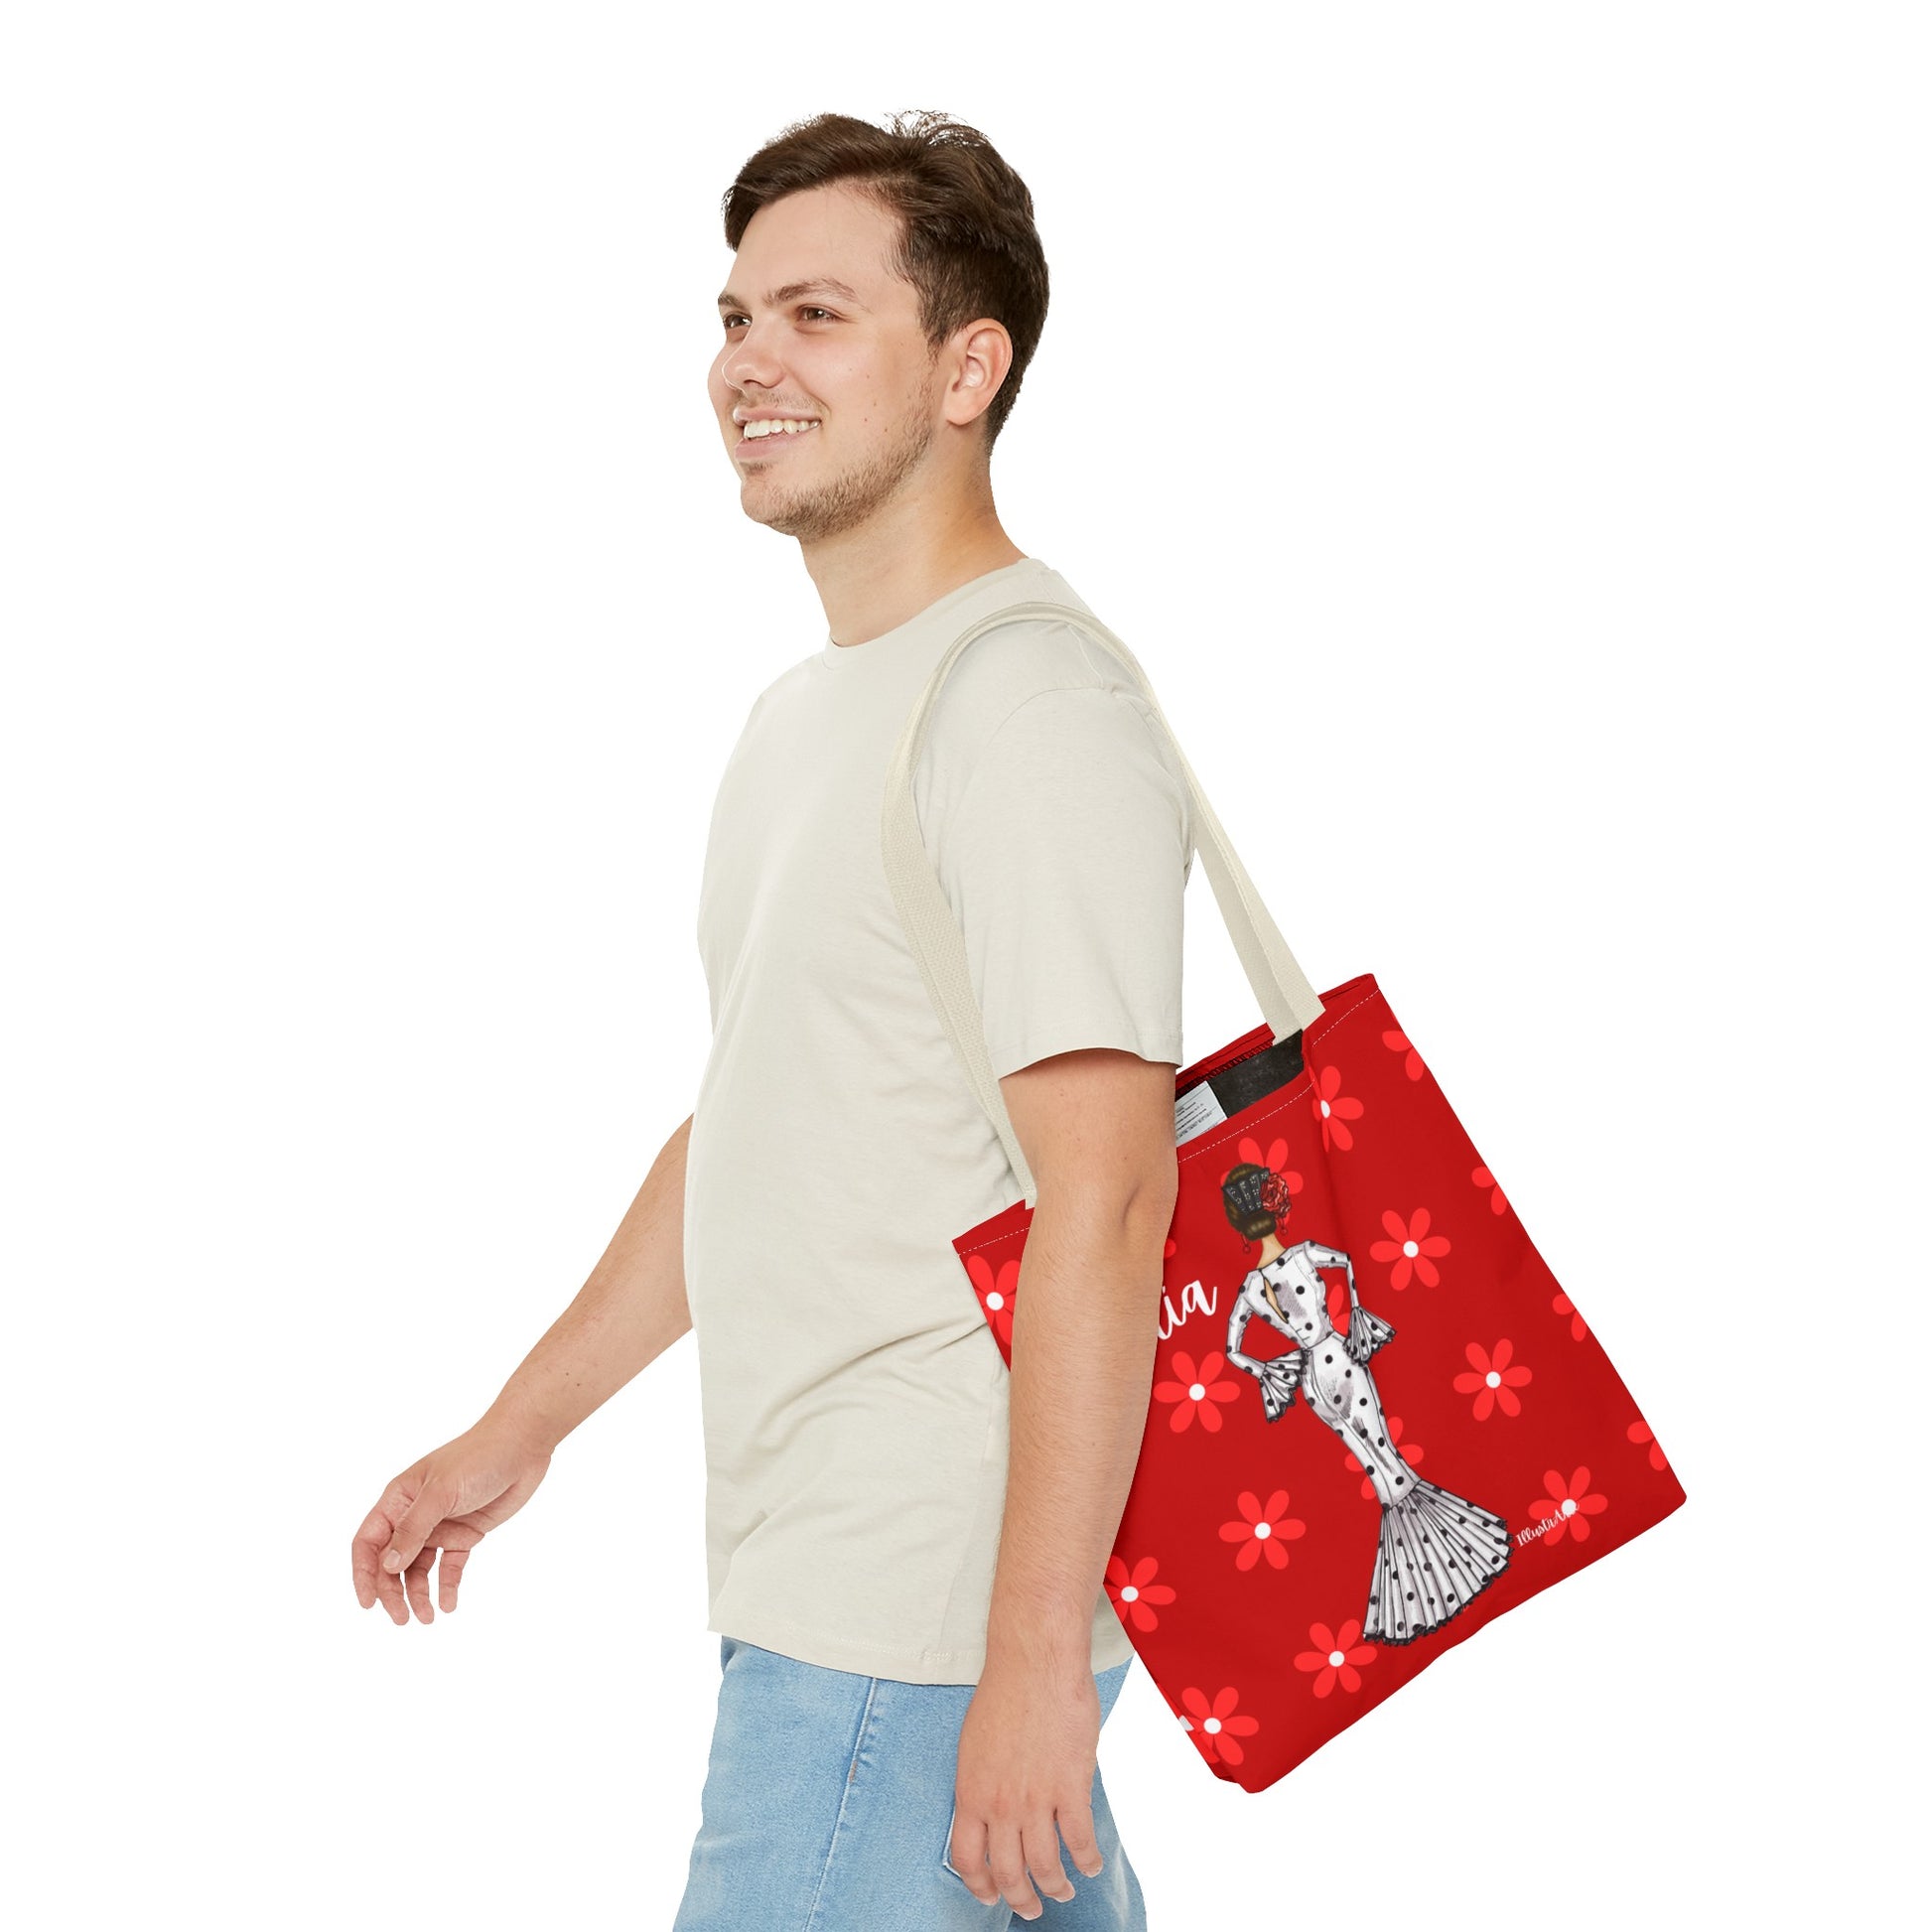 a man carrying a red bag with a lady on it